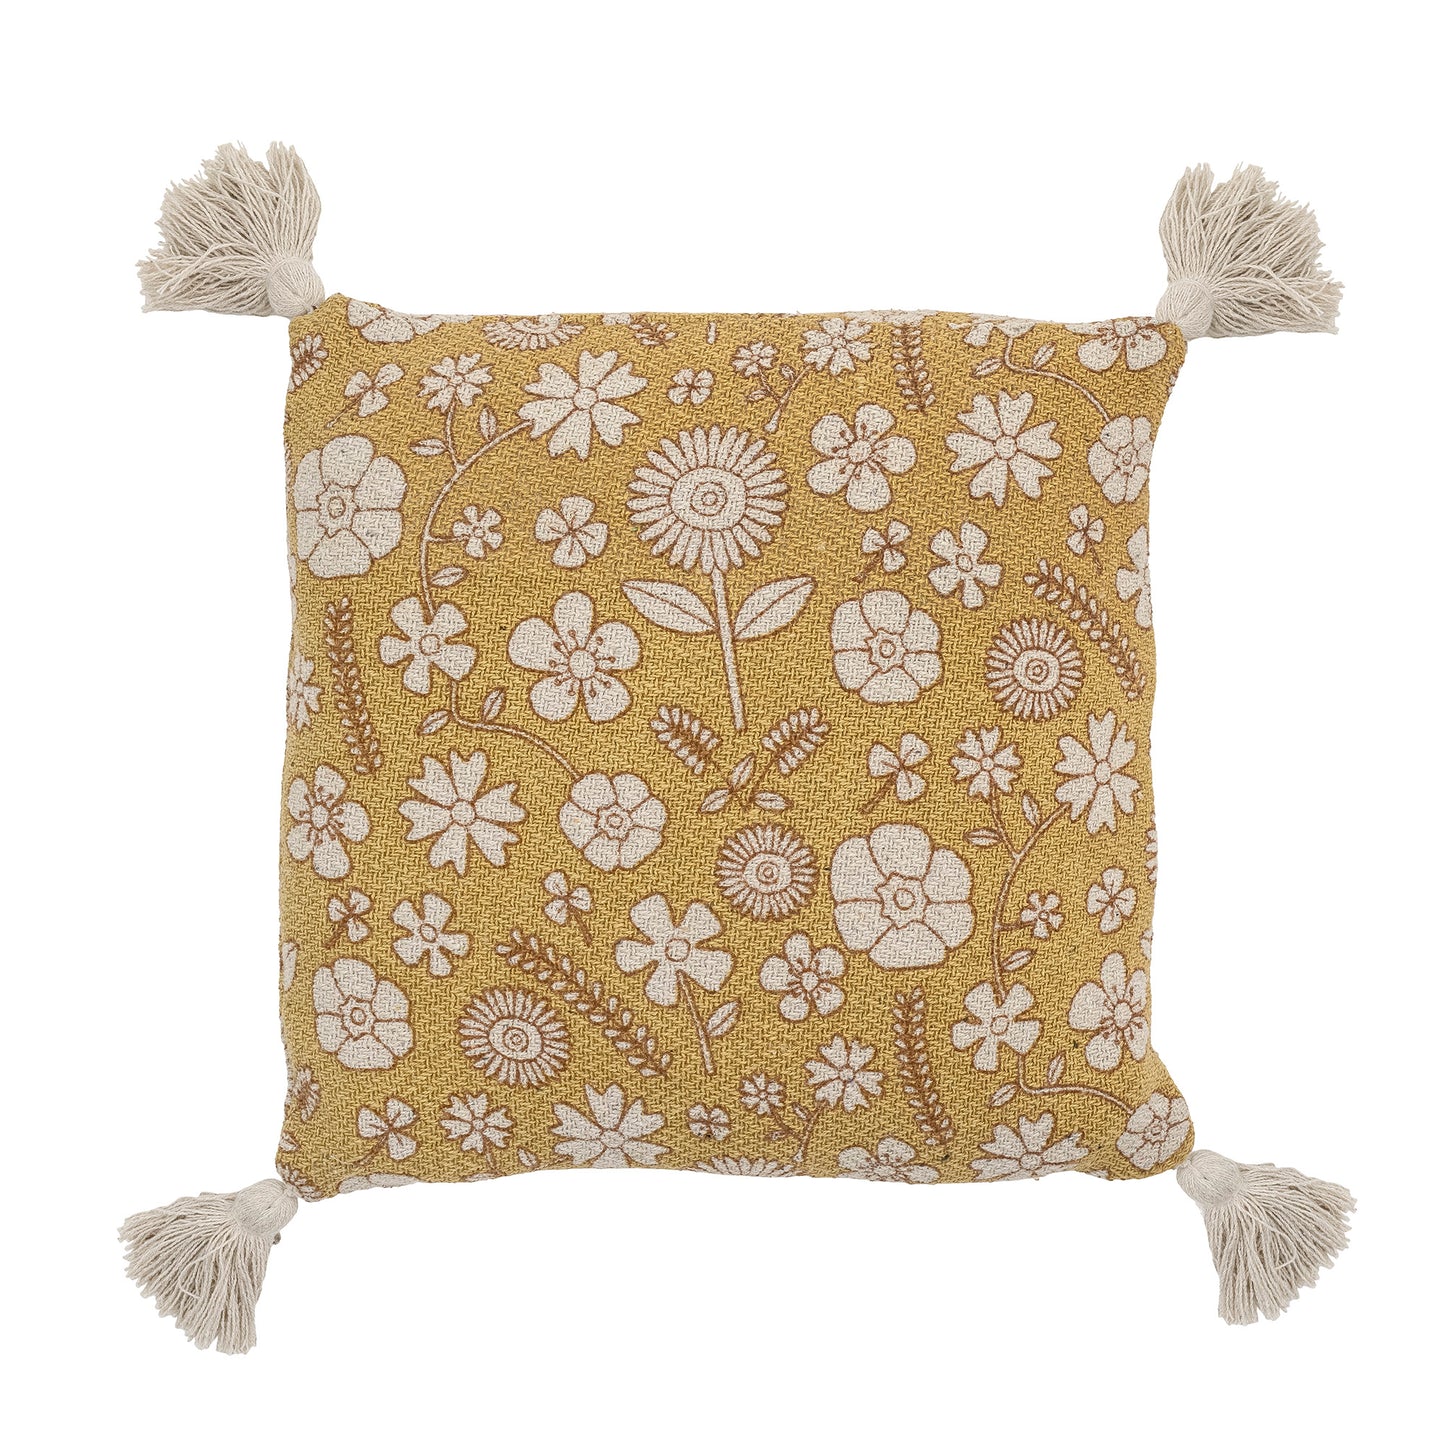 The Camille Cushion by Bloomingville MINI is made of recycled cotton in a beautiful floral print with soft colors. The cushion has lovely tassels in each corner and fits perfectly in any child's room.  L40xH40 cm